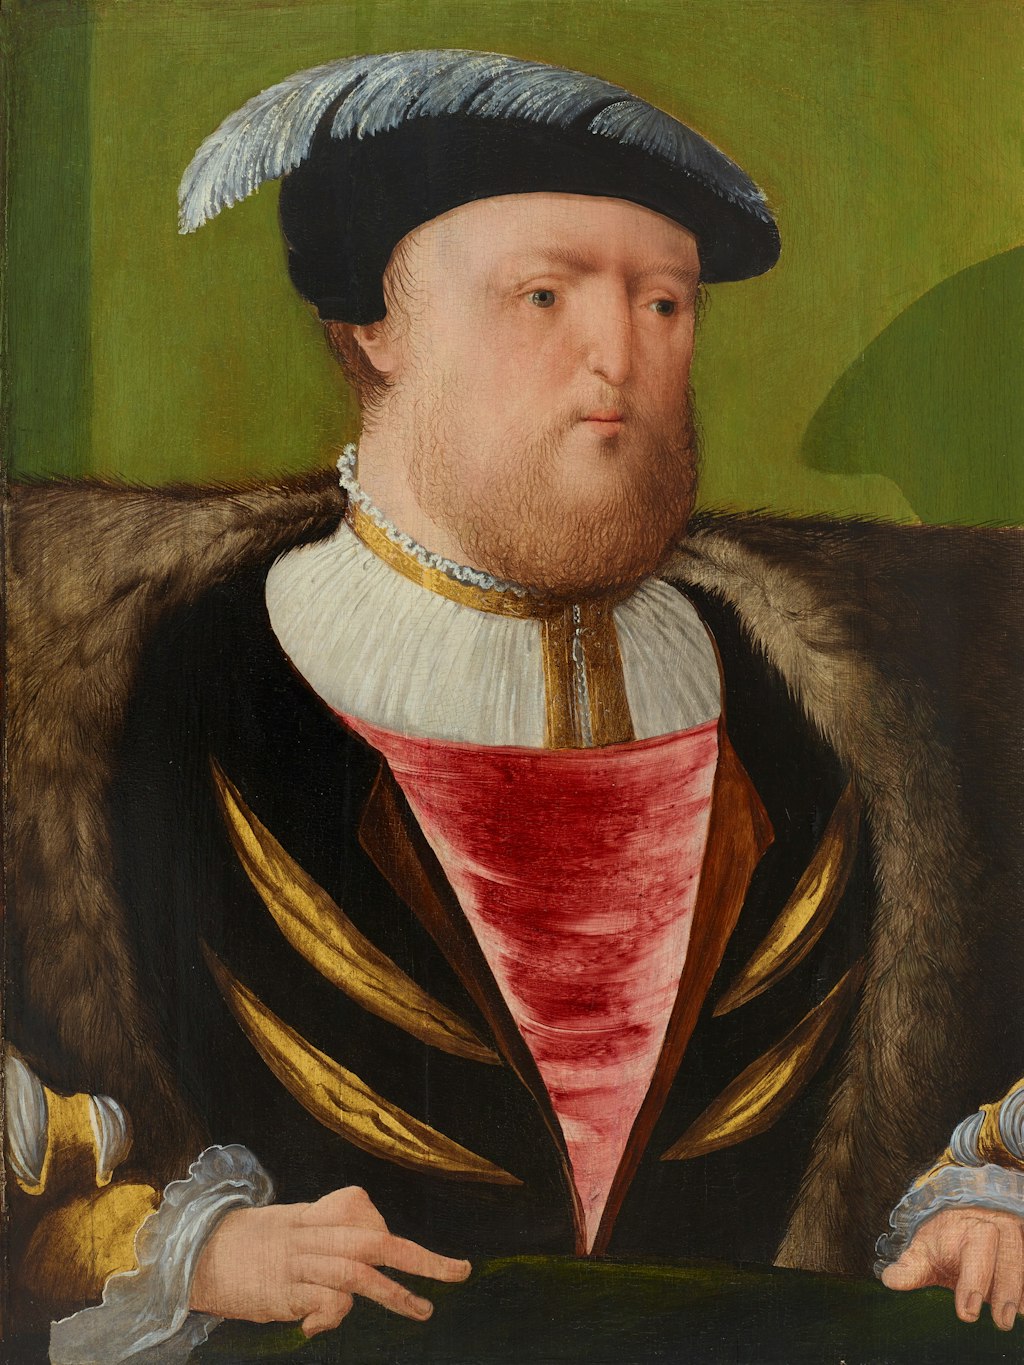 The Henry VIII portrait in the Art Gallery of NSW collection